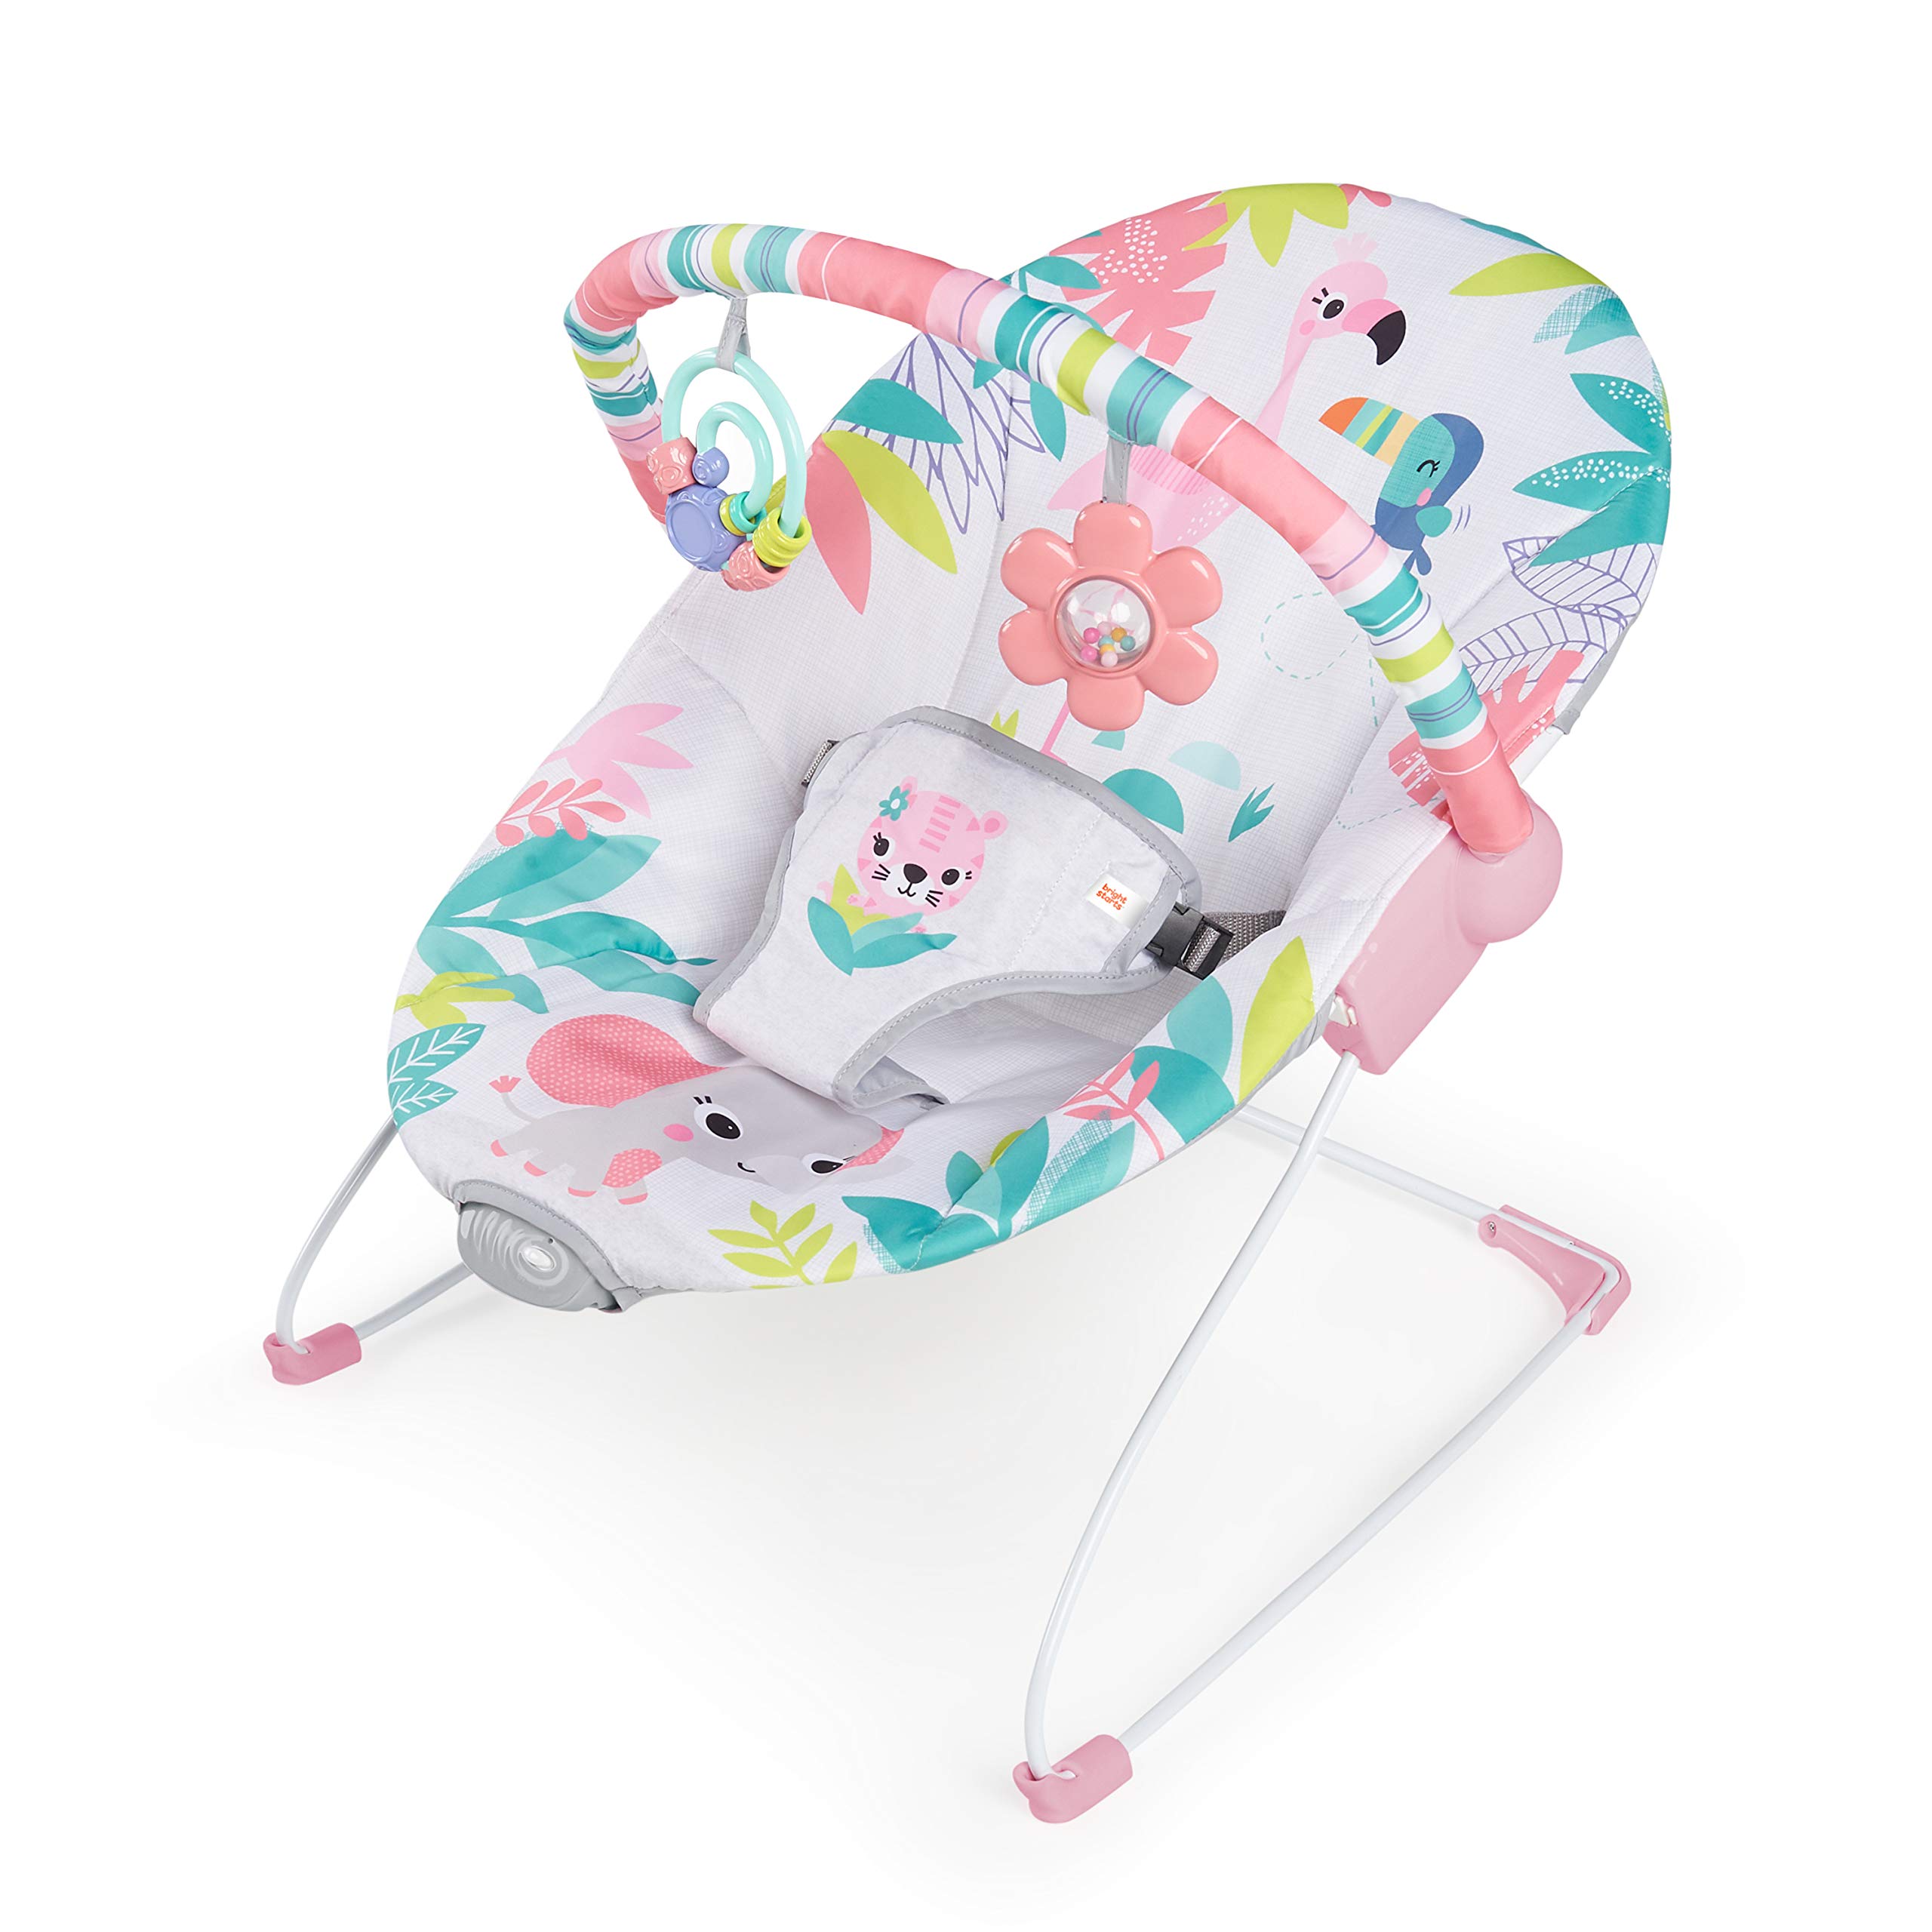 Bright Starts Baby Bouncer Soothing Vibrations Infant Seat - Removable Toy Bar, Nonslip Feet, 0-6 Months Up to 20 lbs (Flamingo 